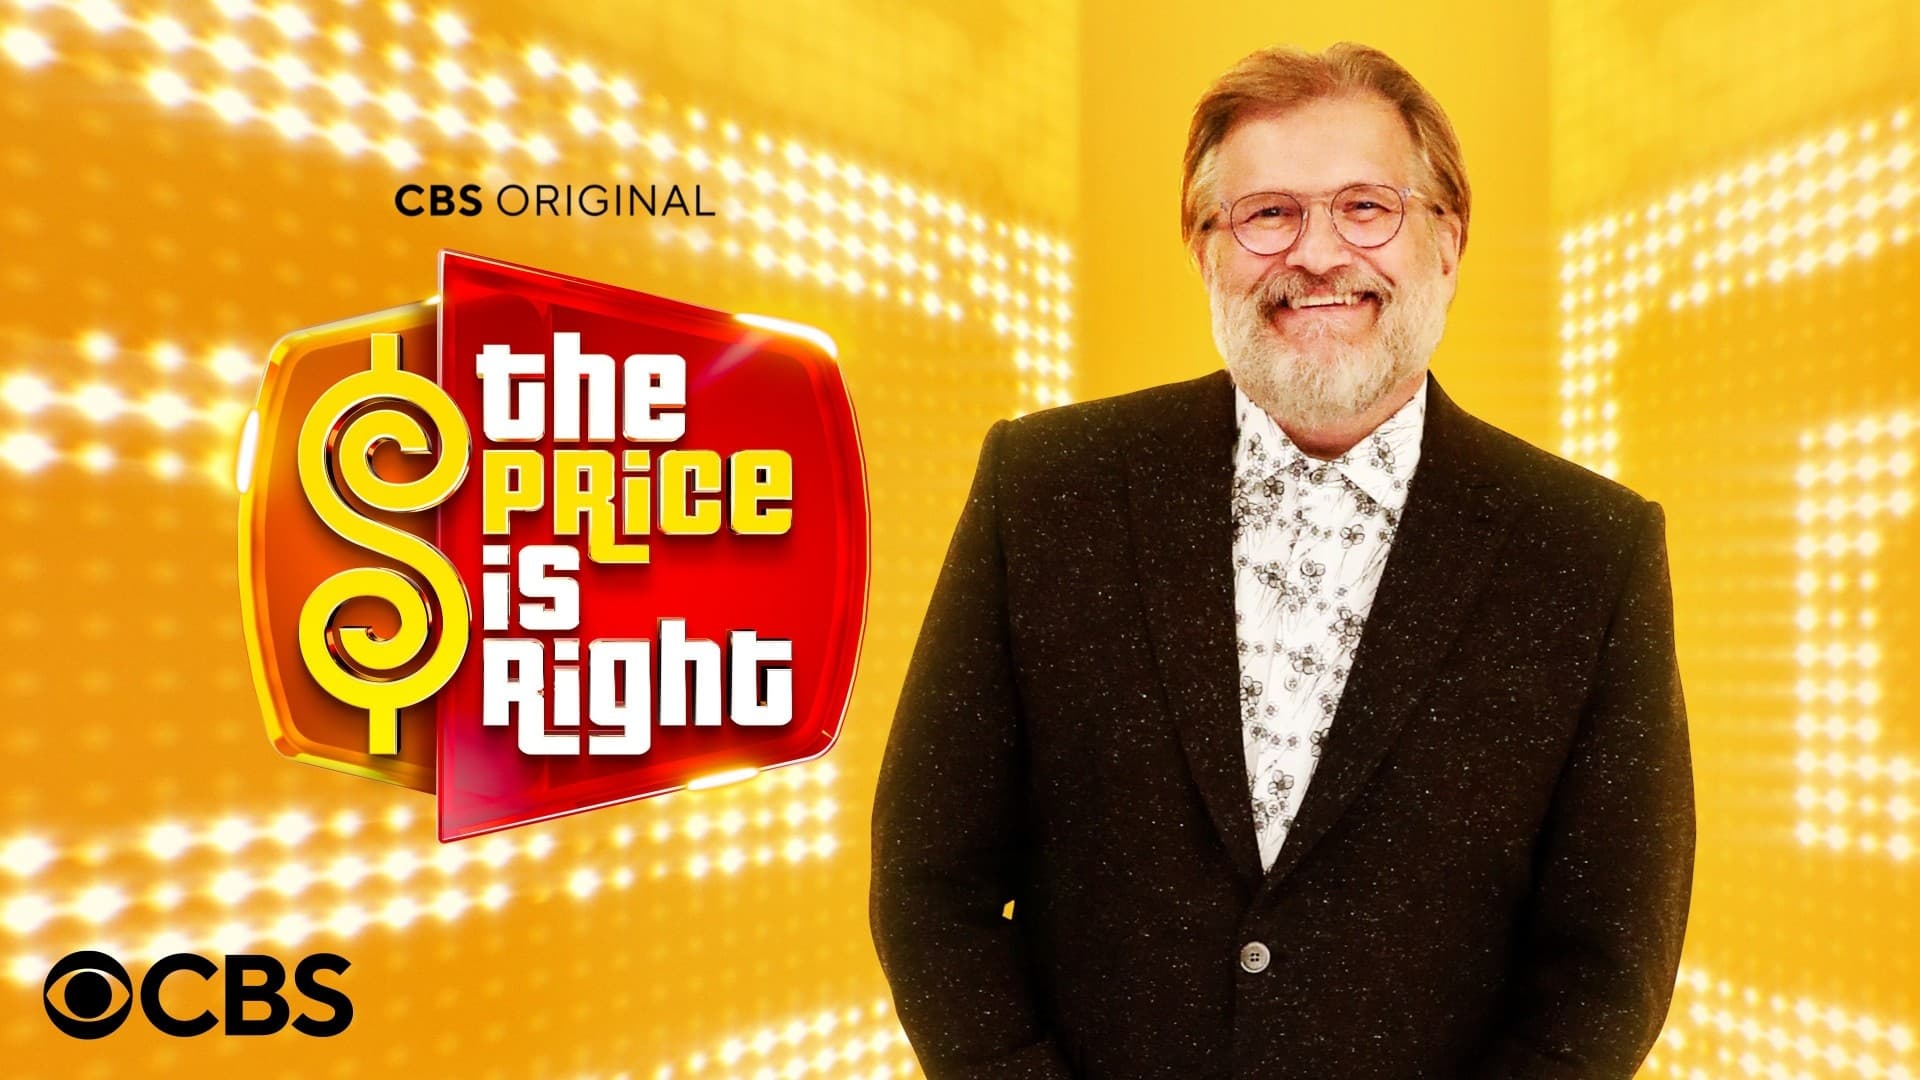 The Price Is Right - Season 3 Episode 8 : The Price Is Right Season 3 Episode 8